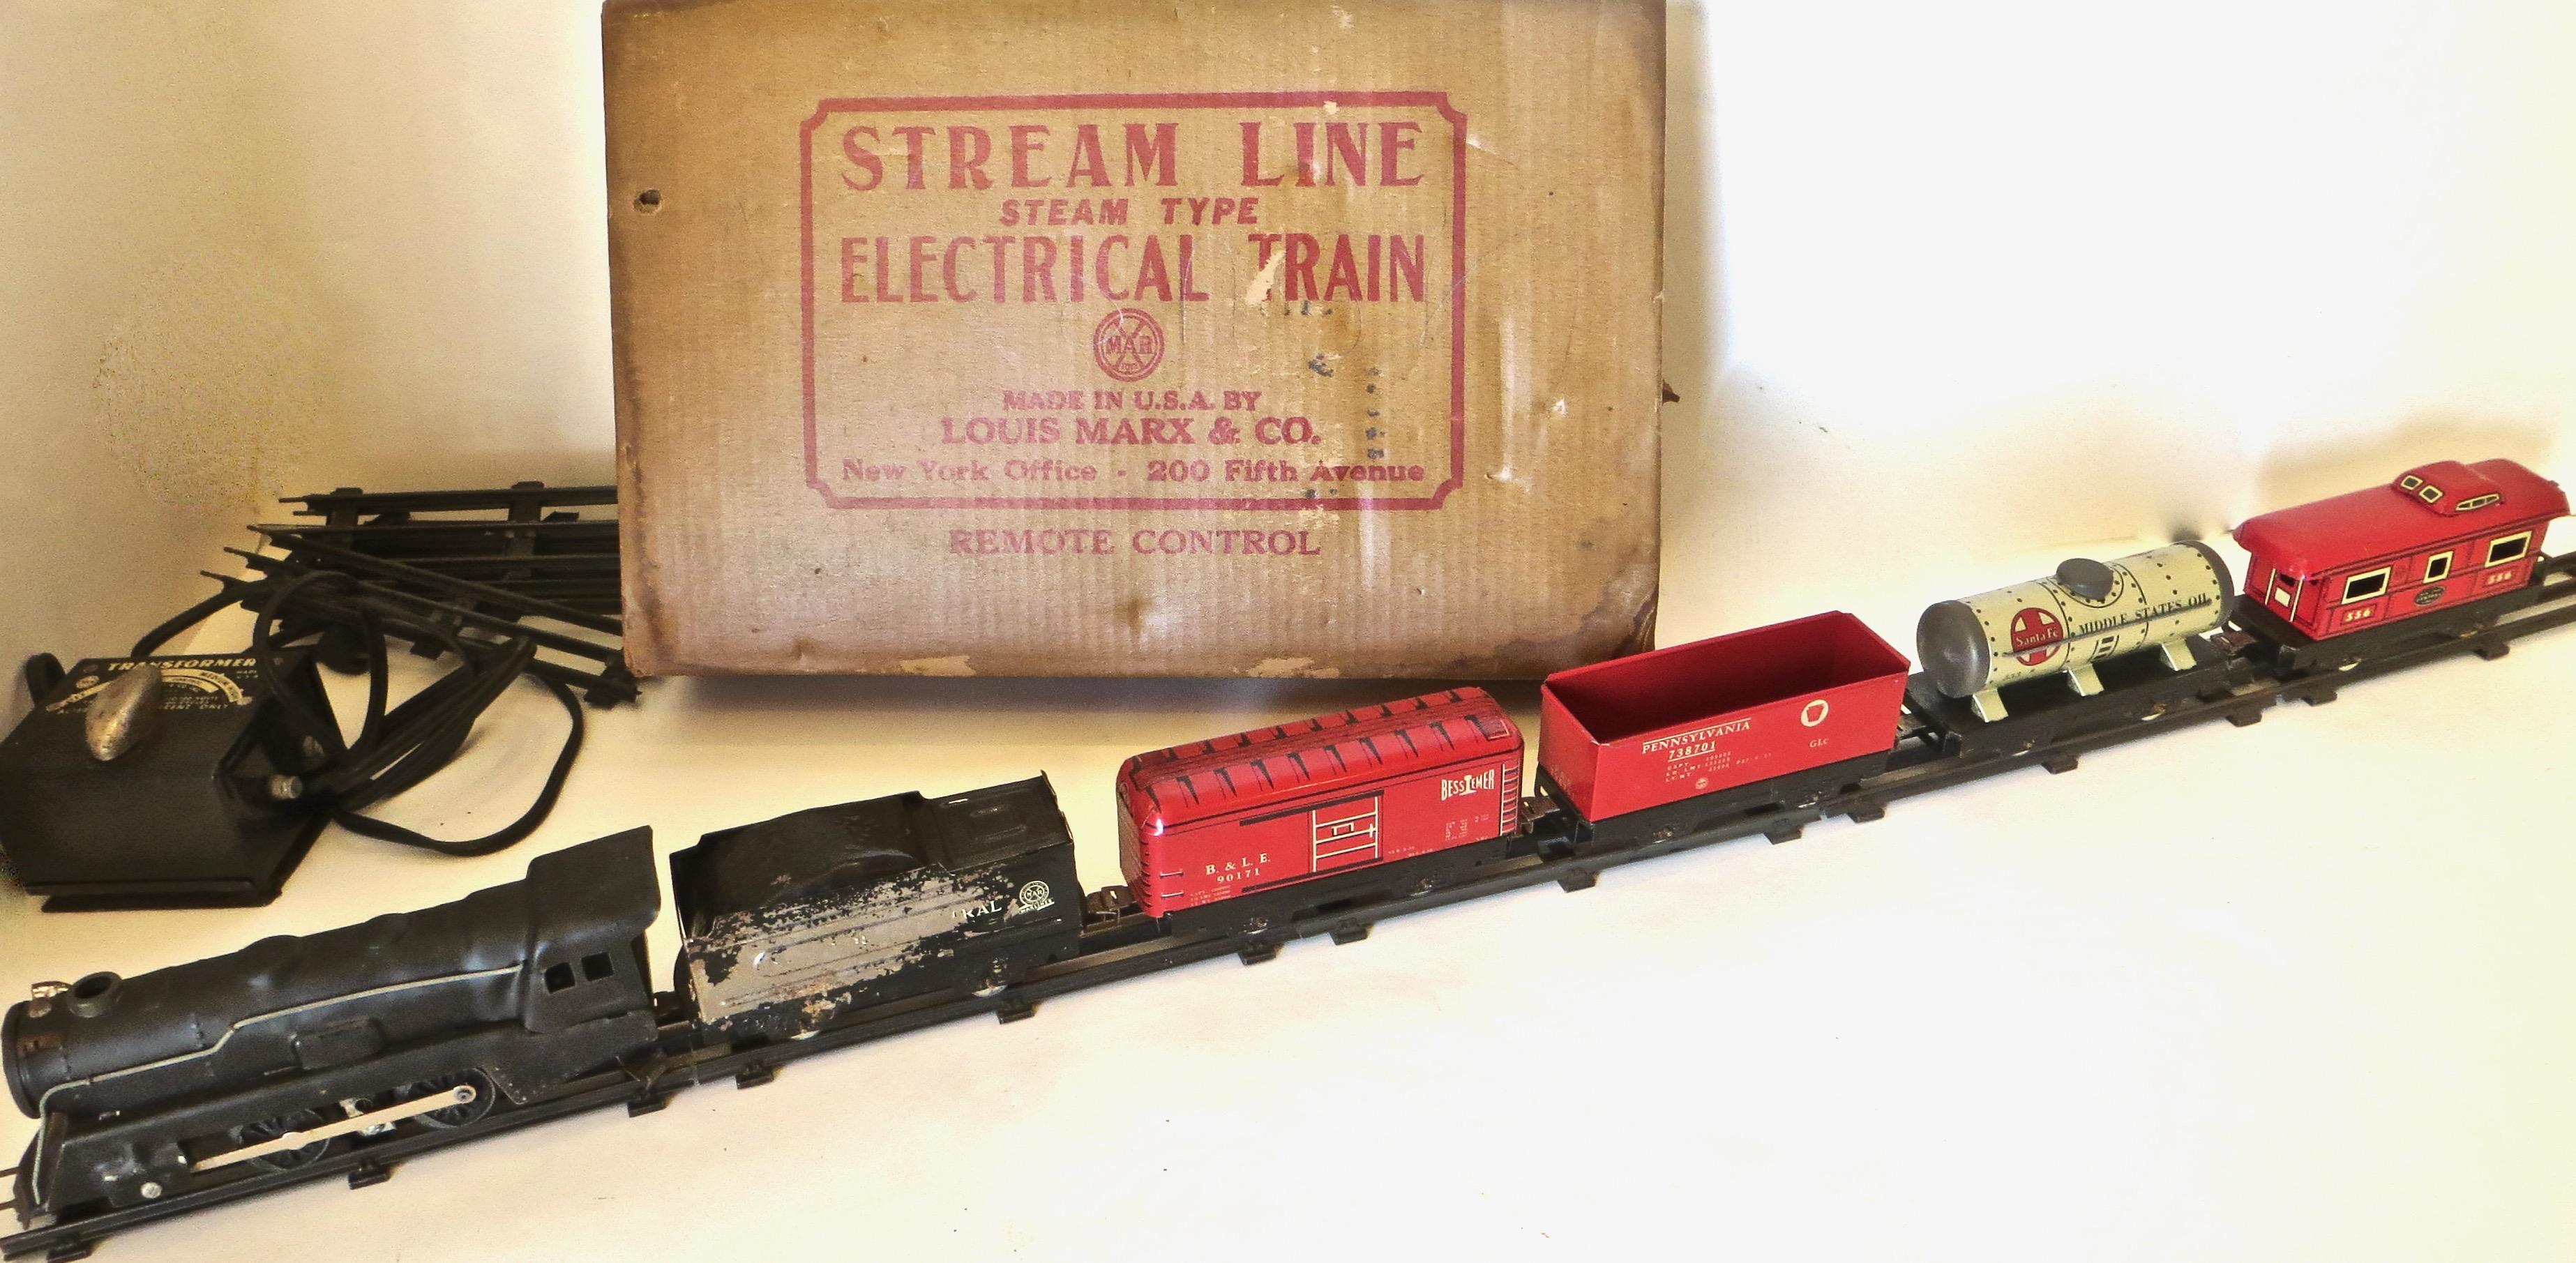 Copious markings note that this train set, in its original packing and shipping box, was made by 